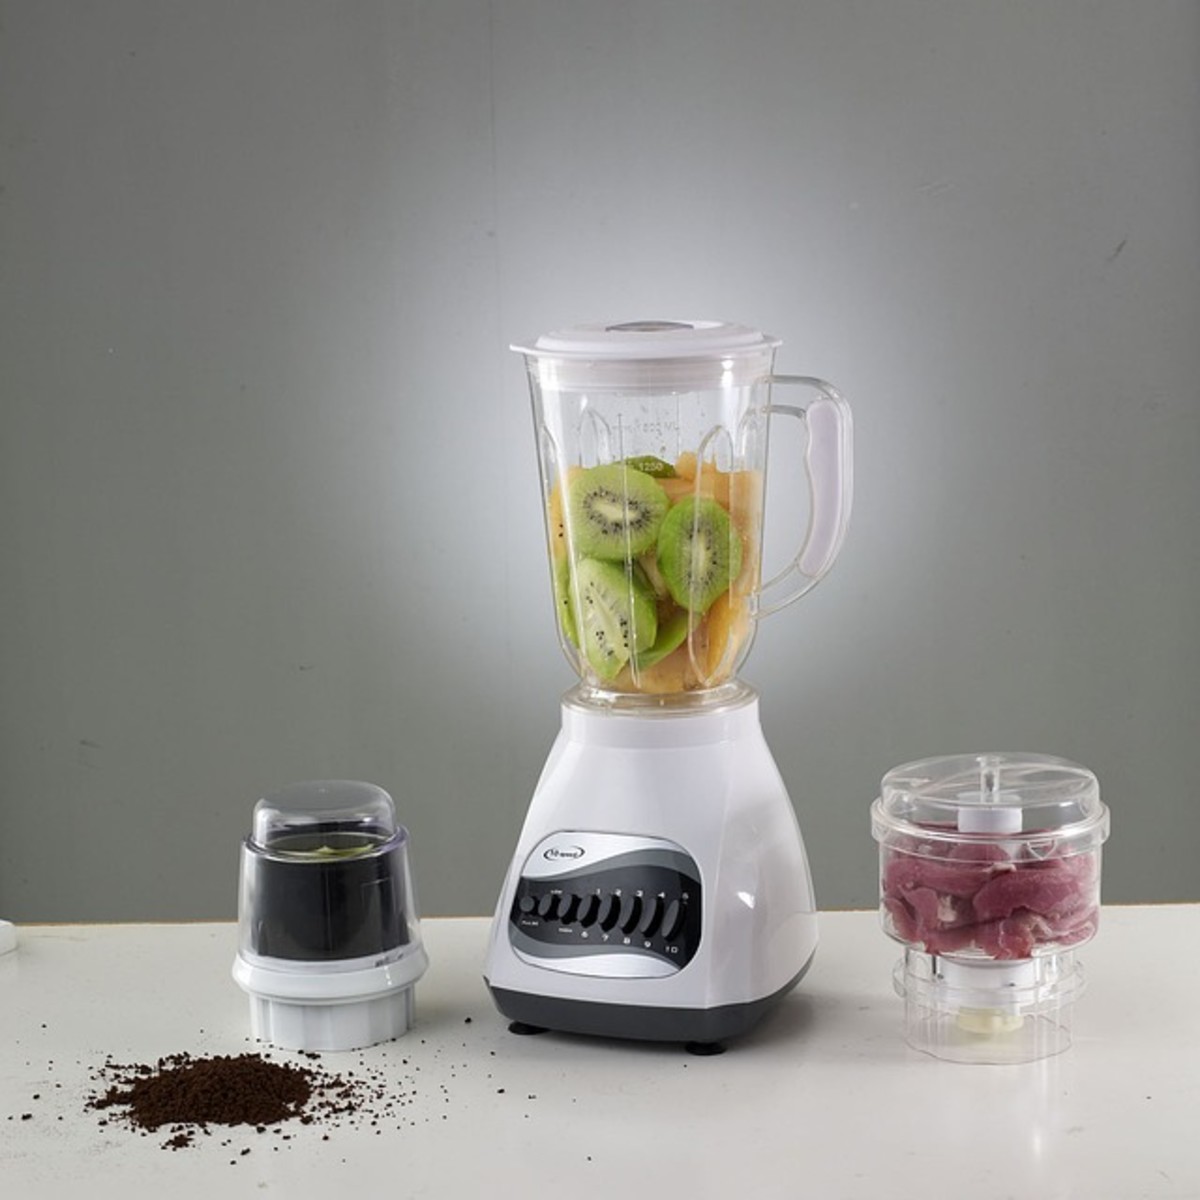 If your wife wants a blender for her birthday, then go ahead and get one for her!